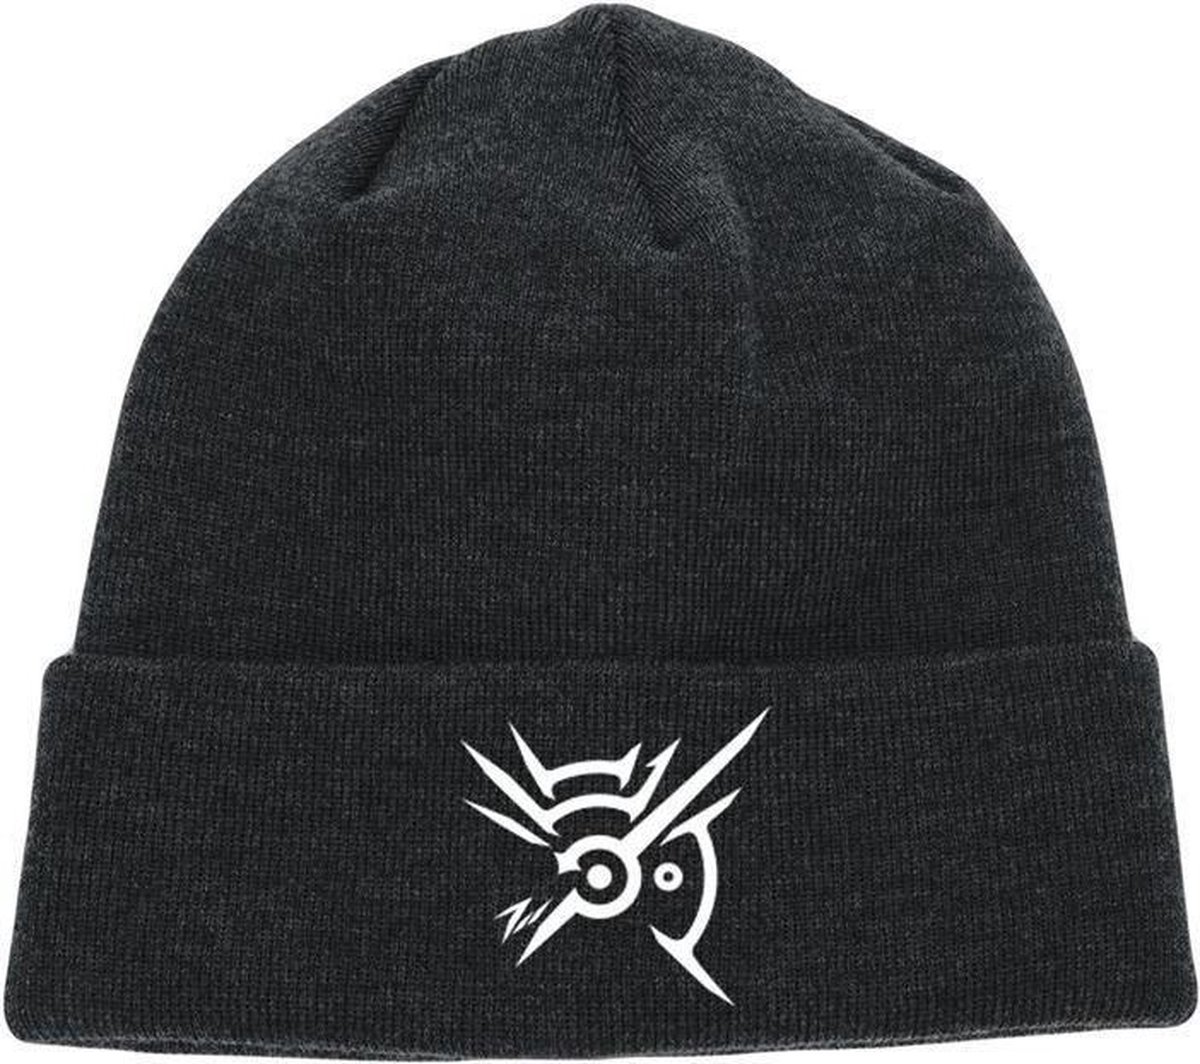 Dishonored - Beanie - Mark of the Outsider